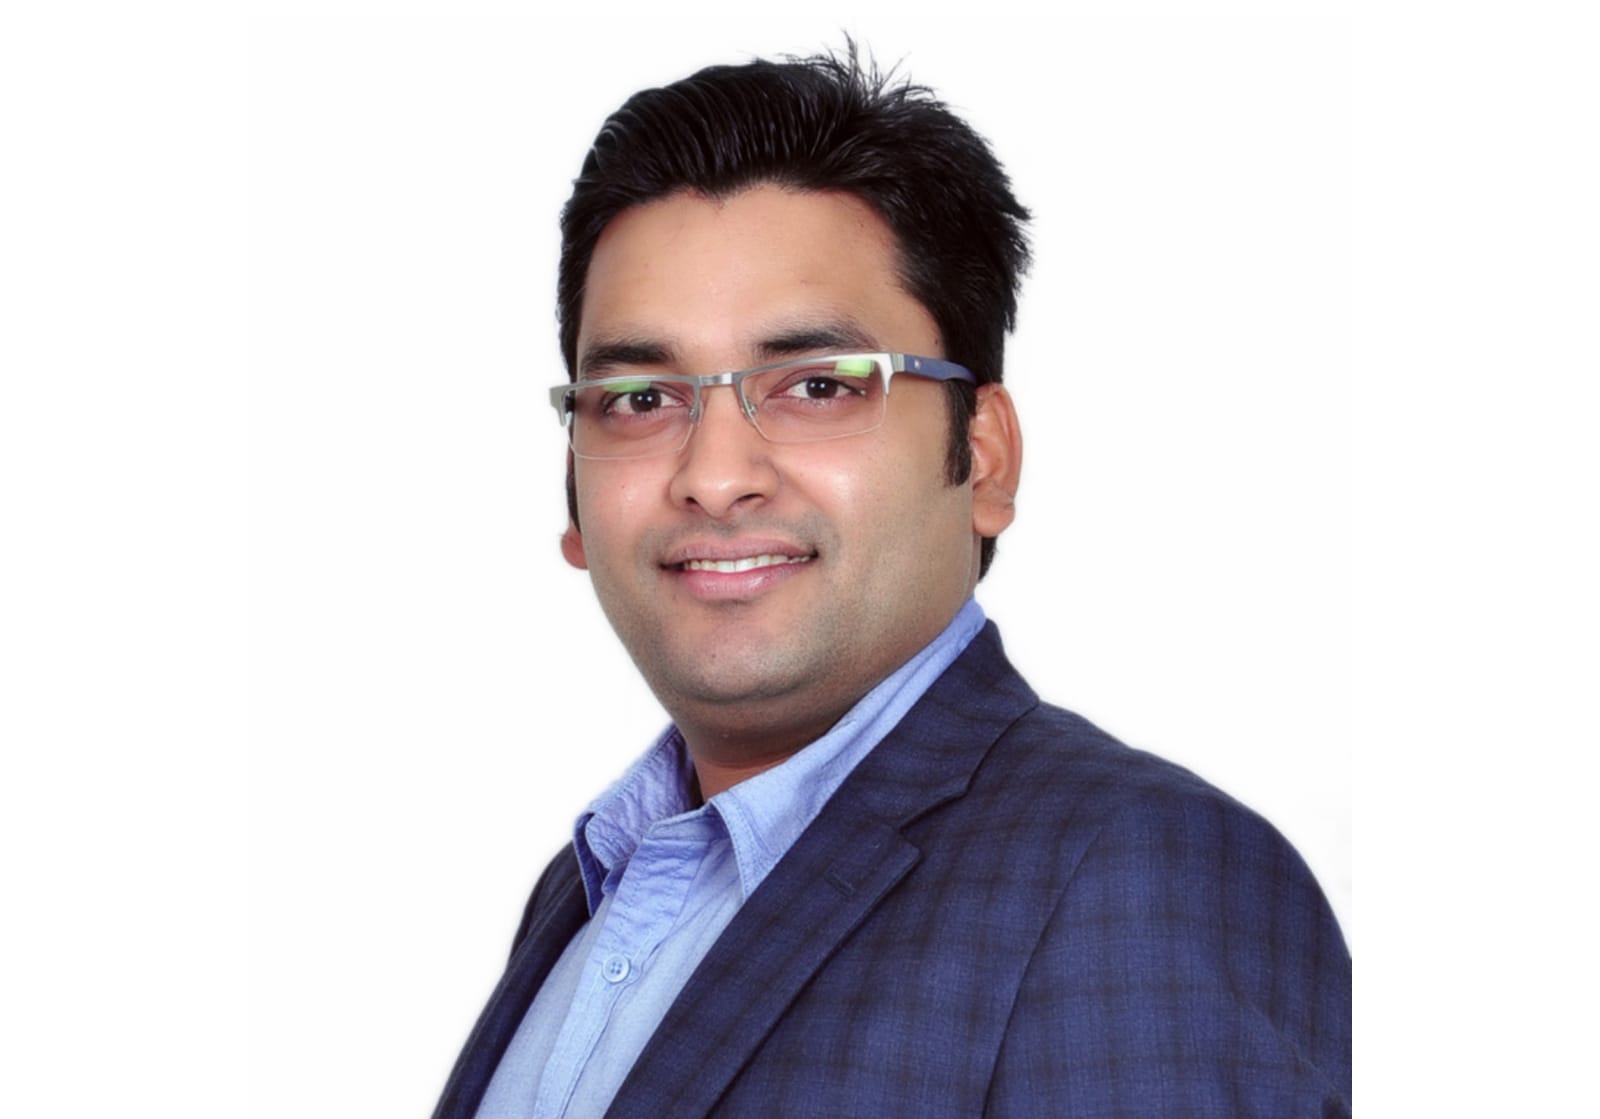 Techila Global Services’ CEO Chitiz Agarwal is dominating the sales and marketing industry with his skills and labor